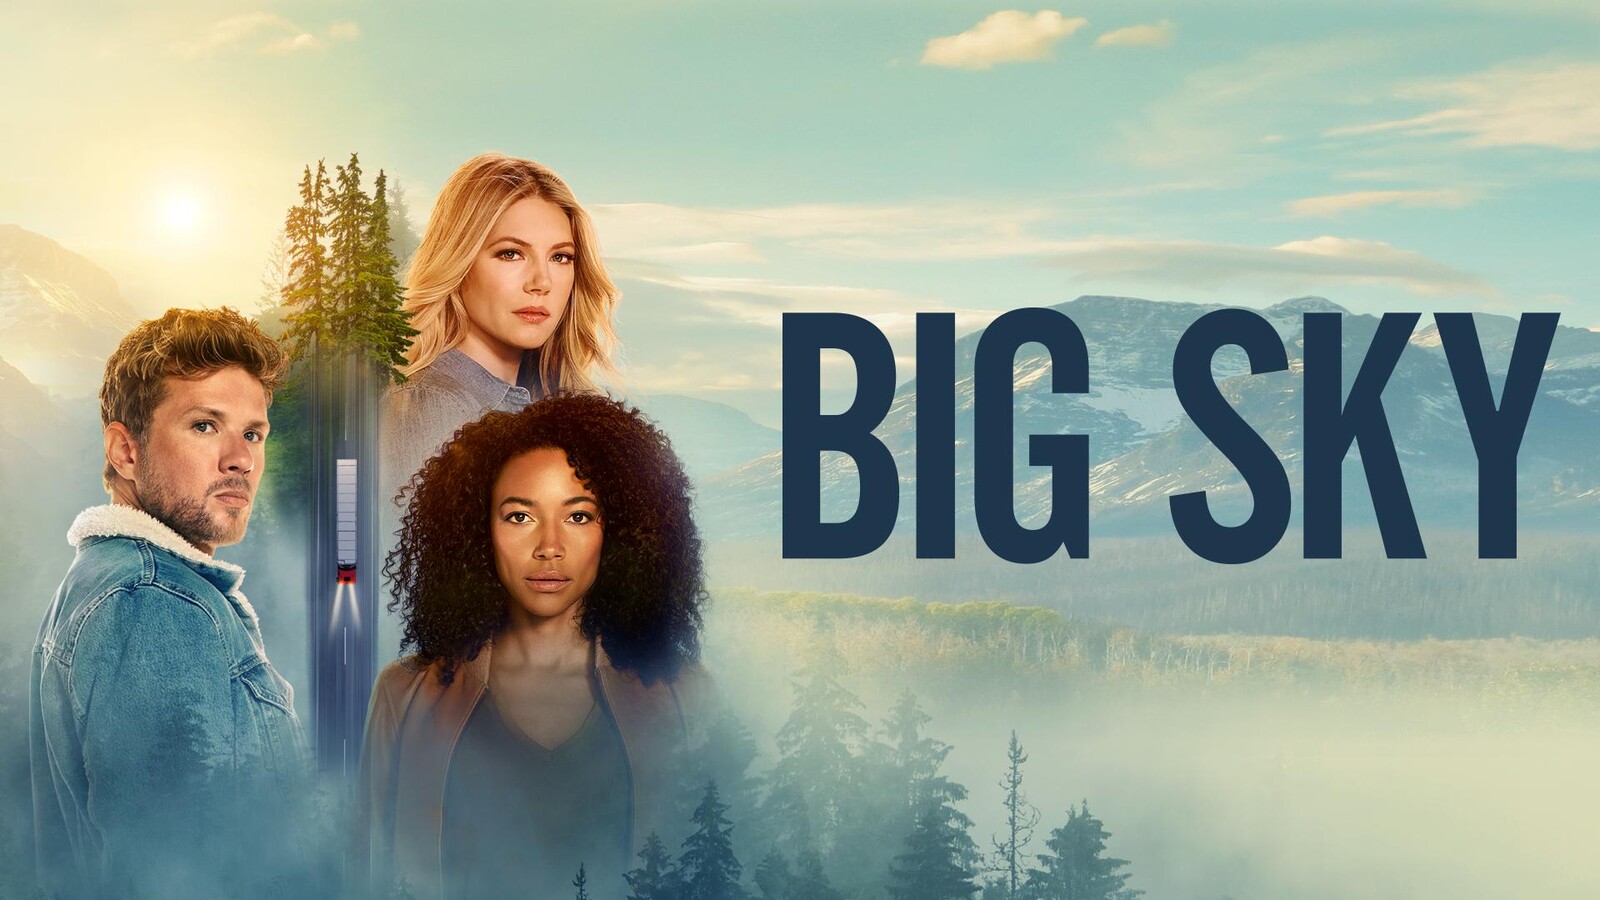 Big Sky Tv Show All Episodes With Spoilers: Everything Begun To Fall Apart